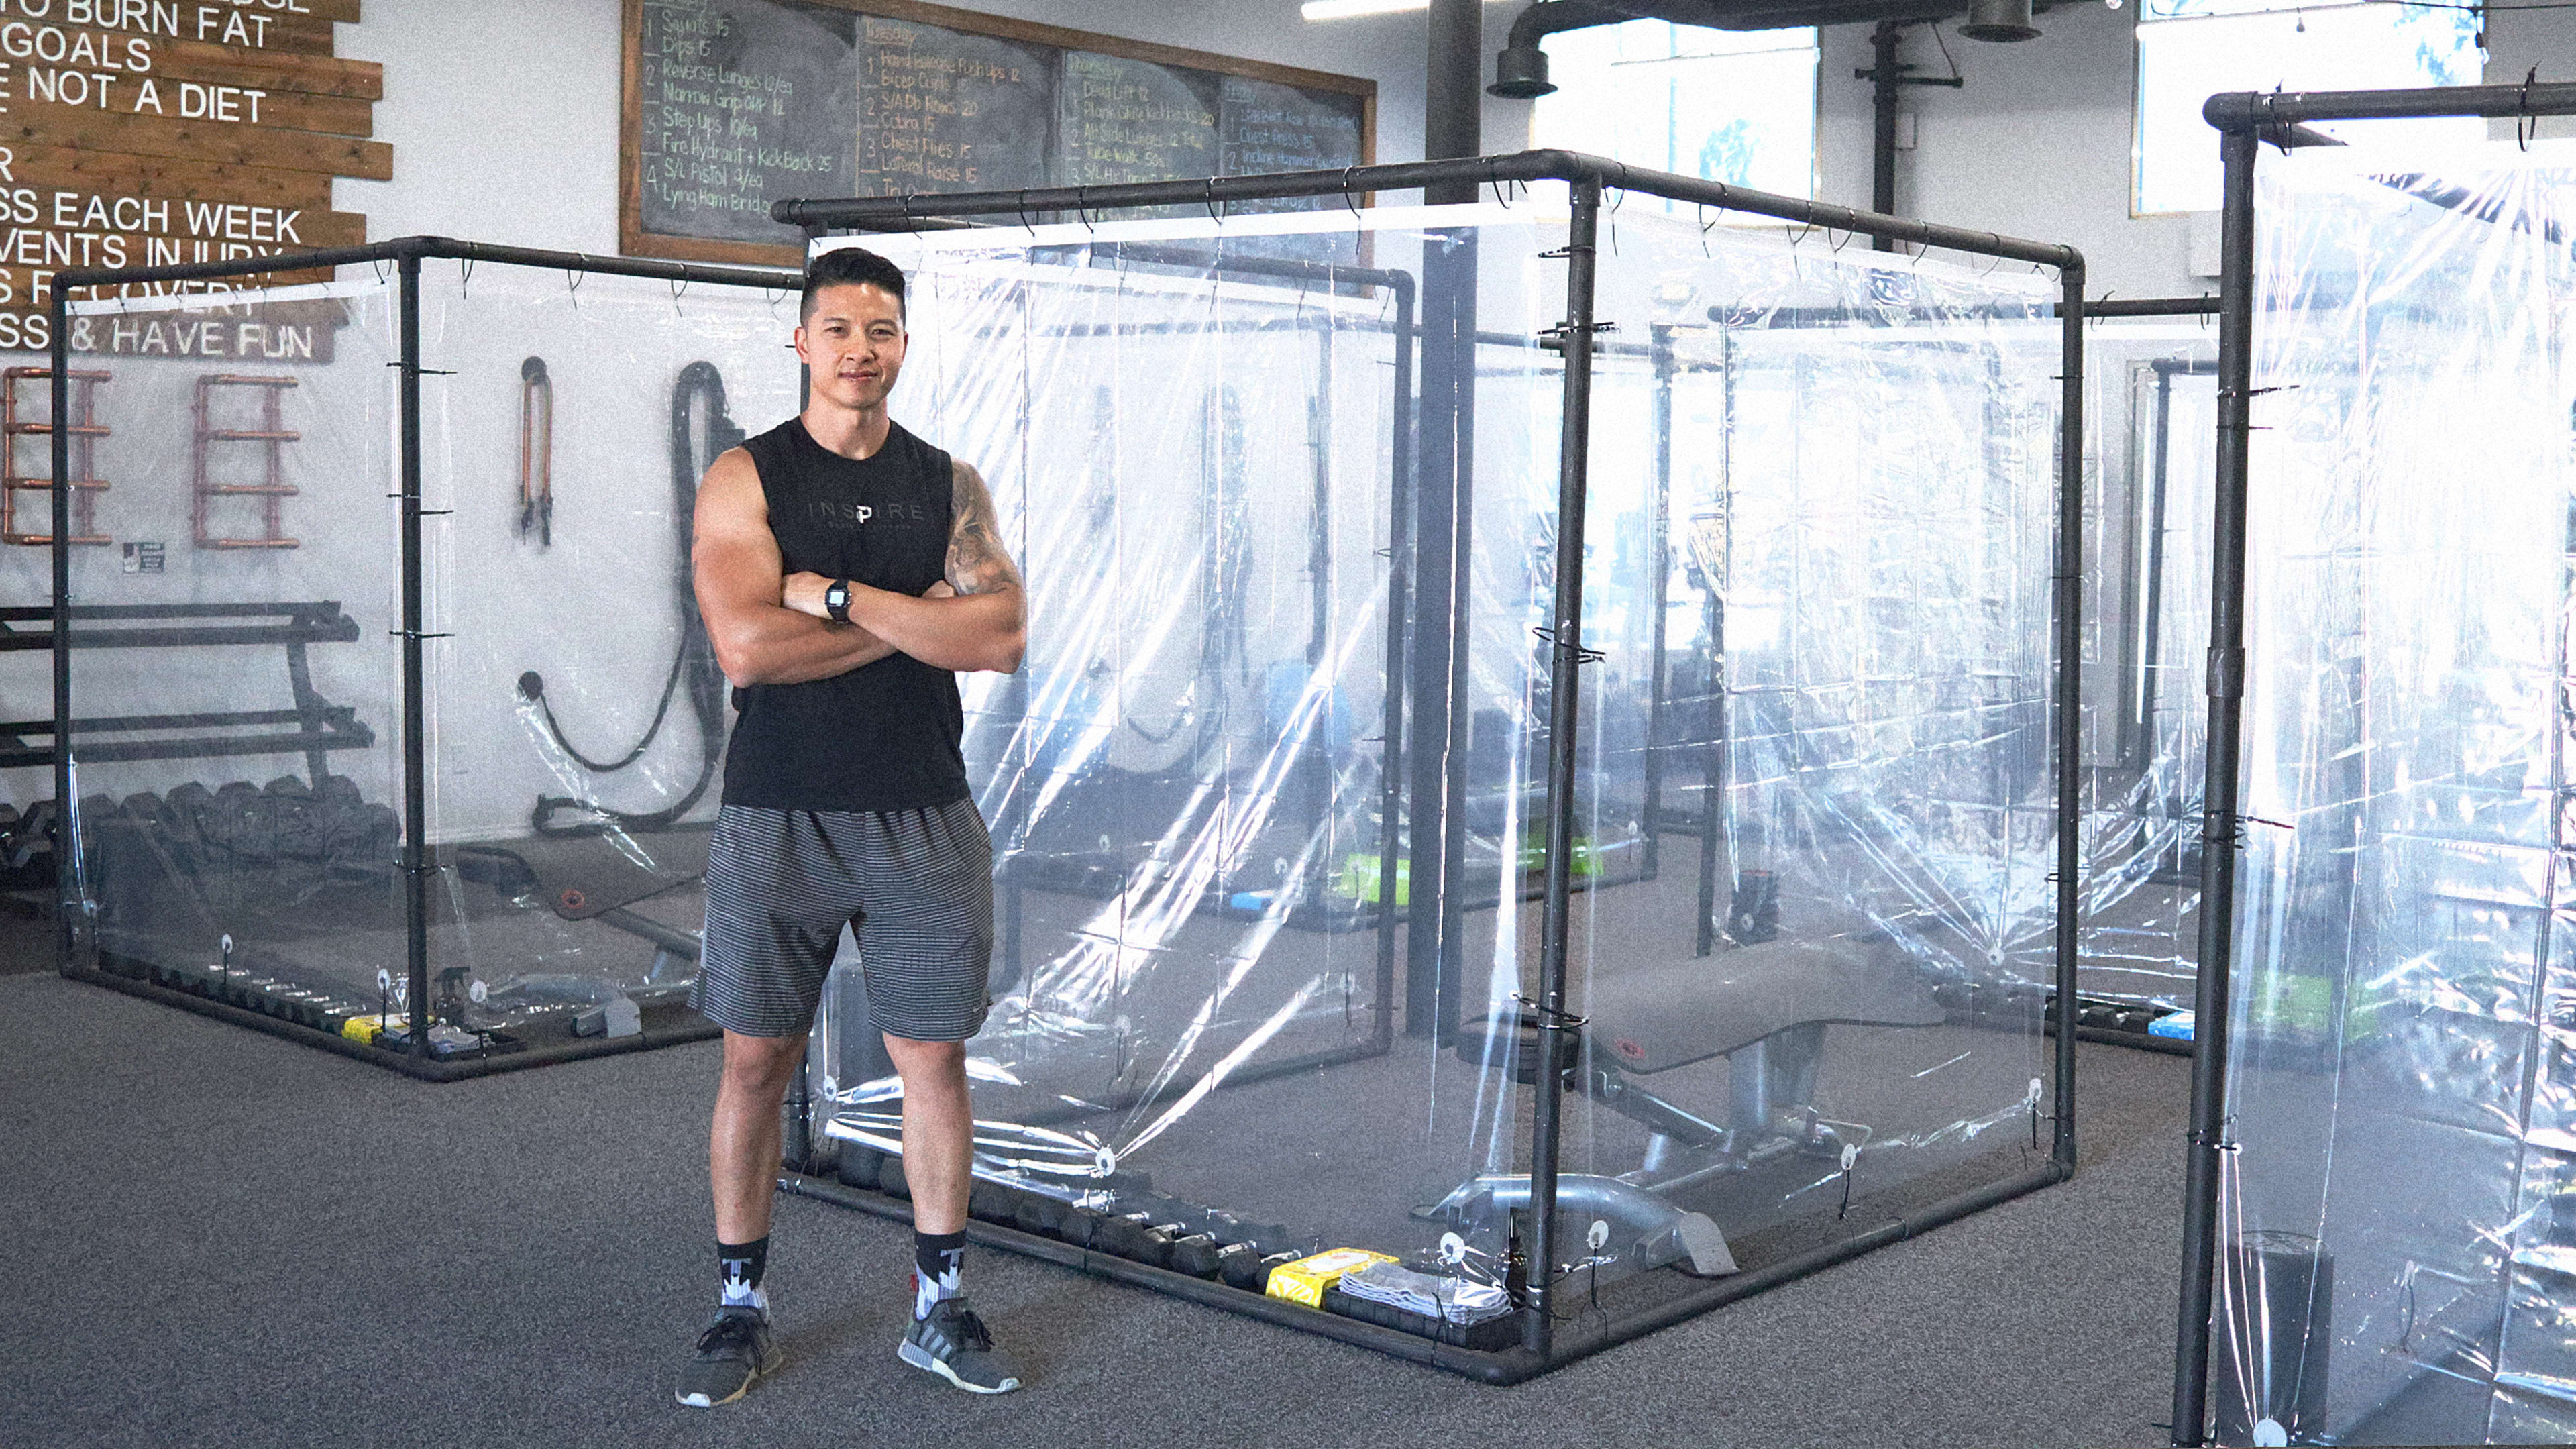 Scared to go back to the gym? Don’t worry, your very own shower curtain cage awaits